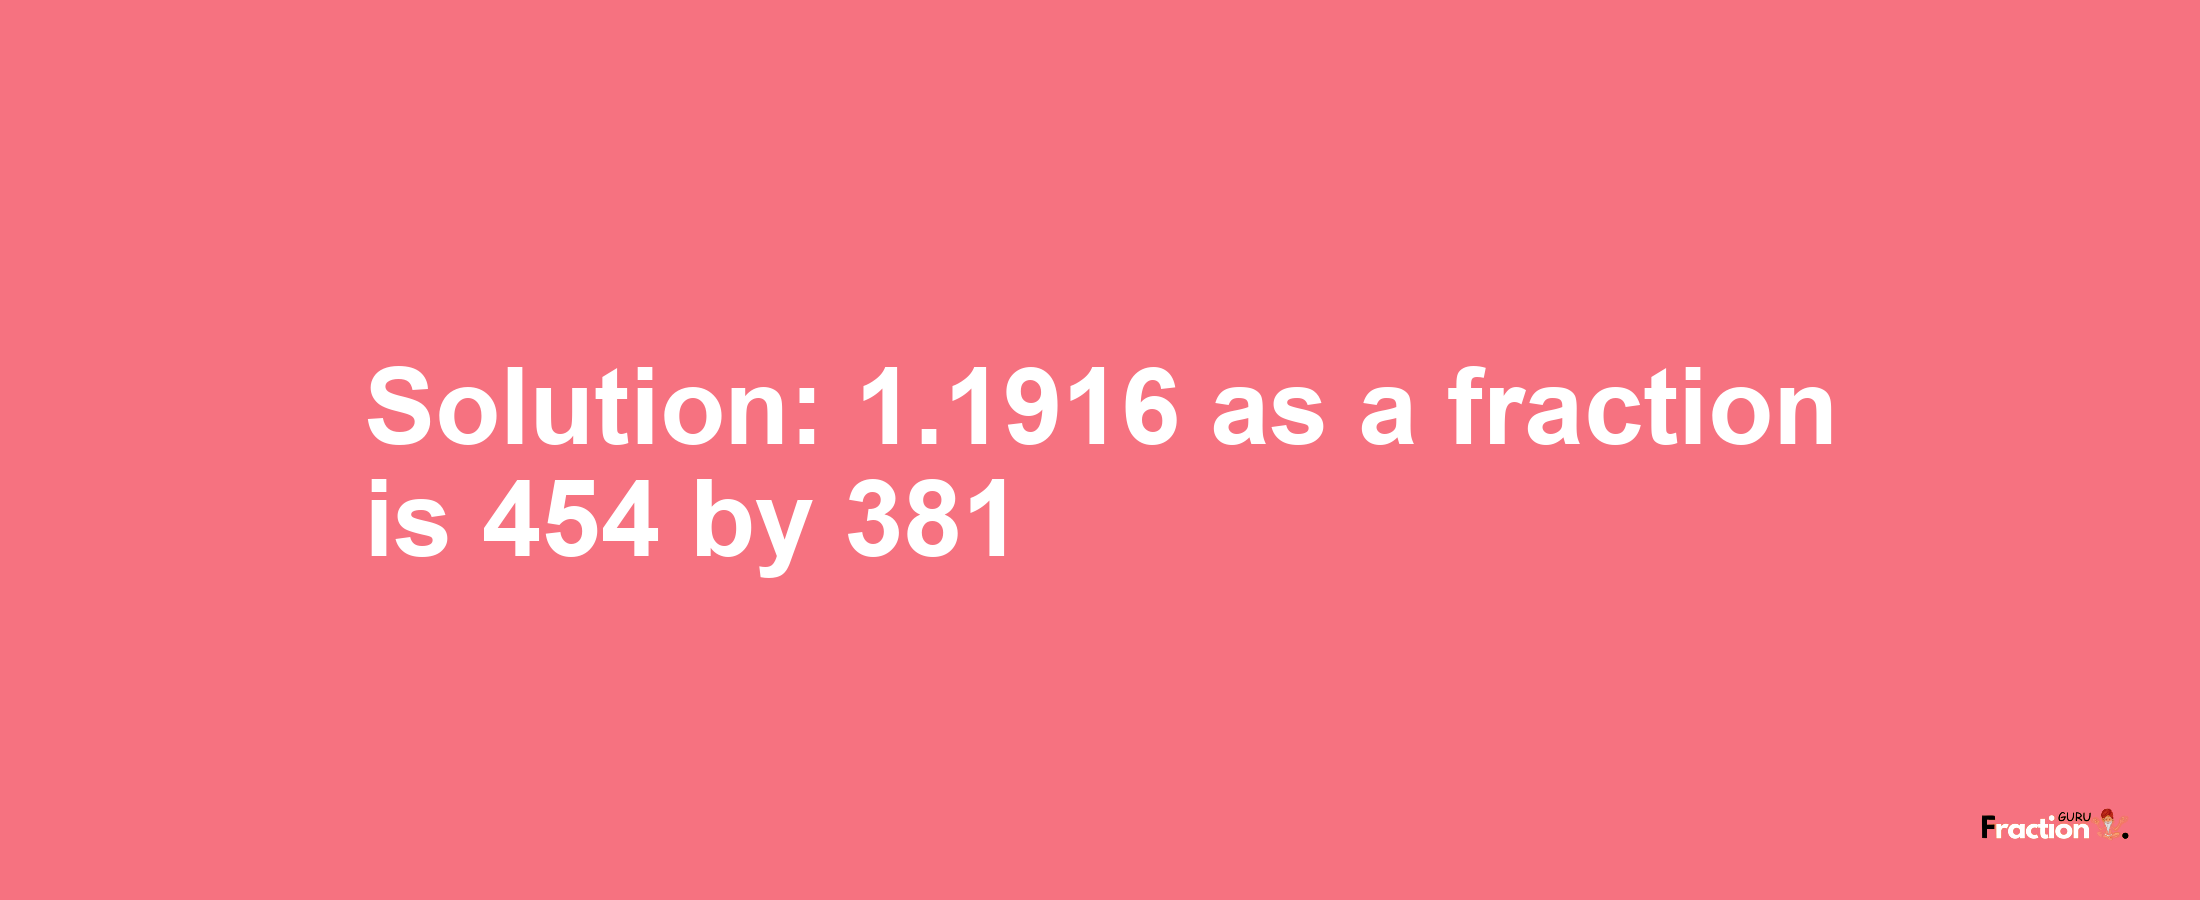 Solution:1.1916 as a fraction is 454/381